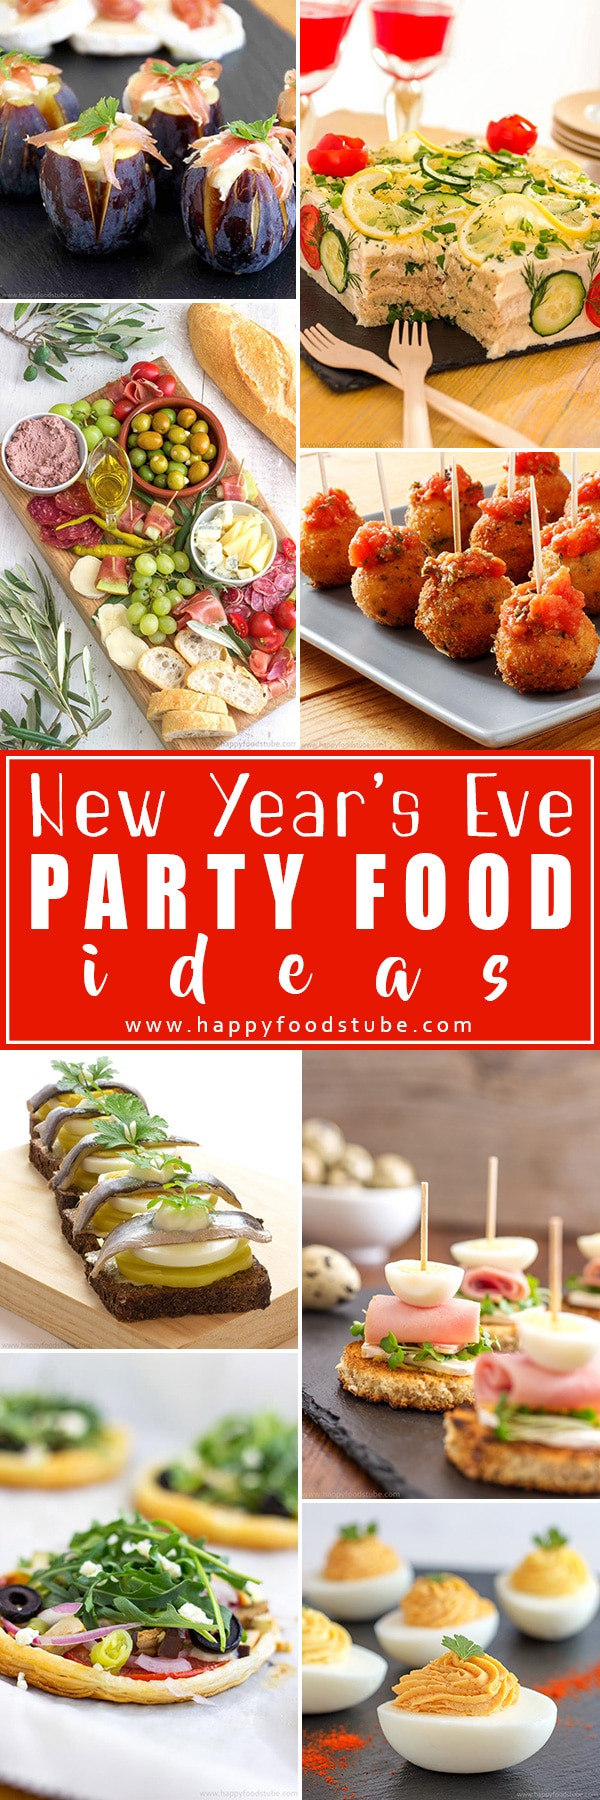 New Year Food Ideas
 New Years Eve Party Food Ideas Happy Foods Tube